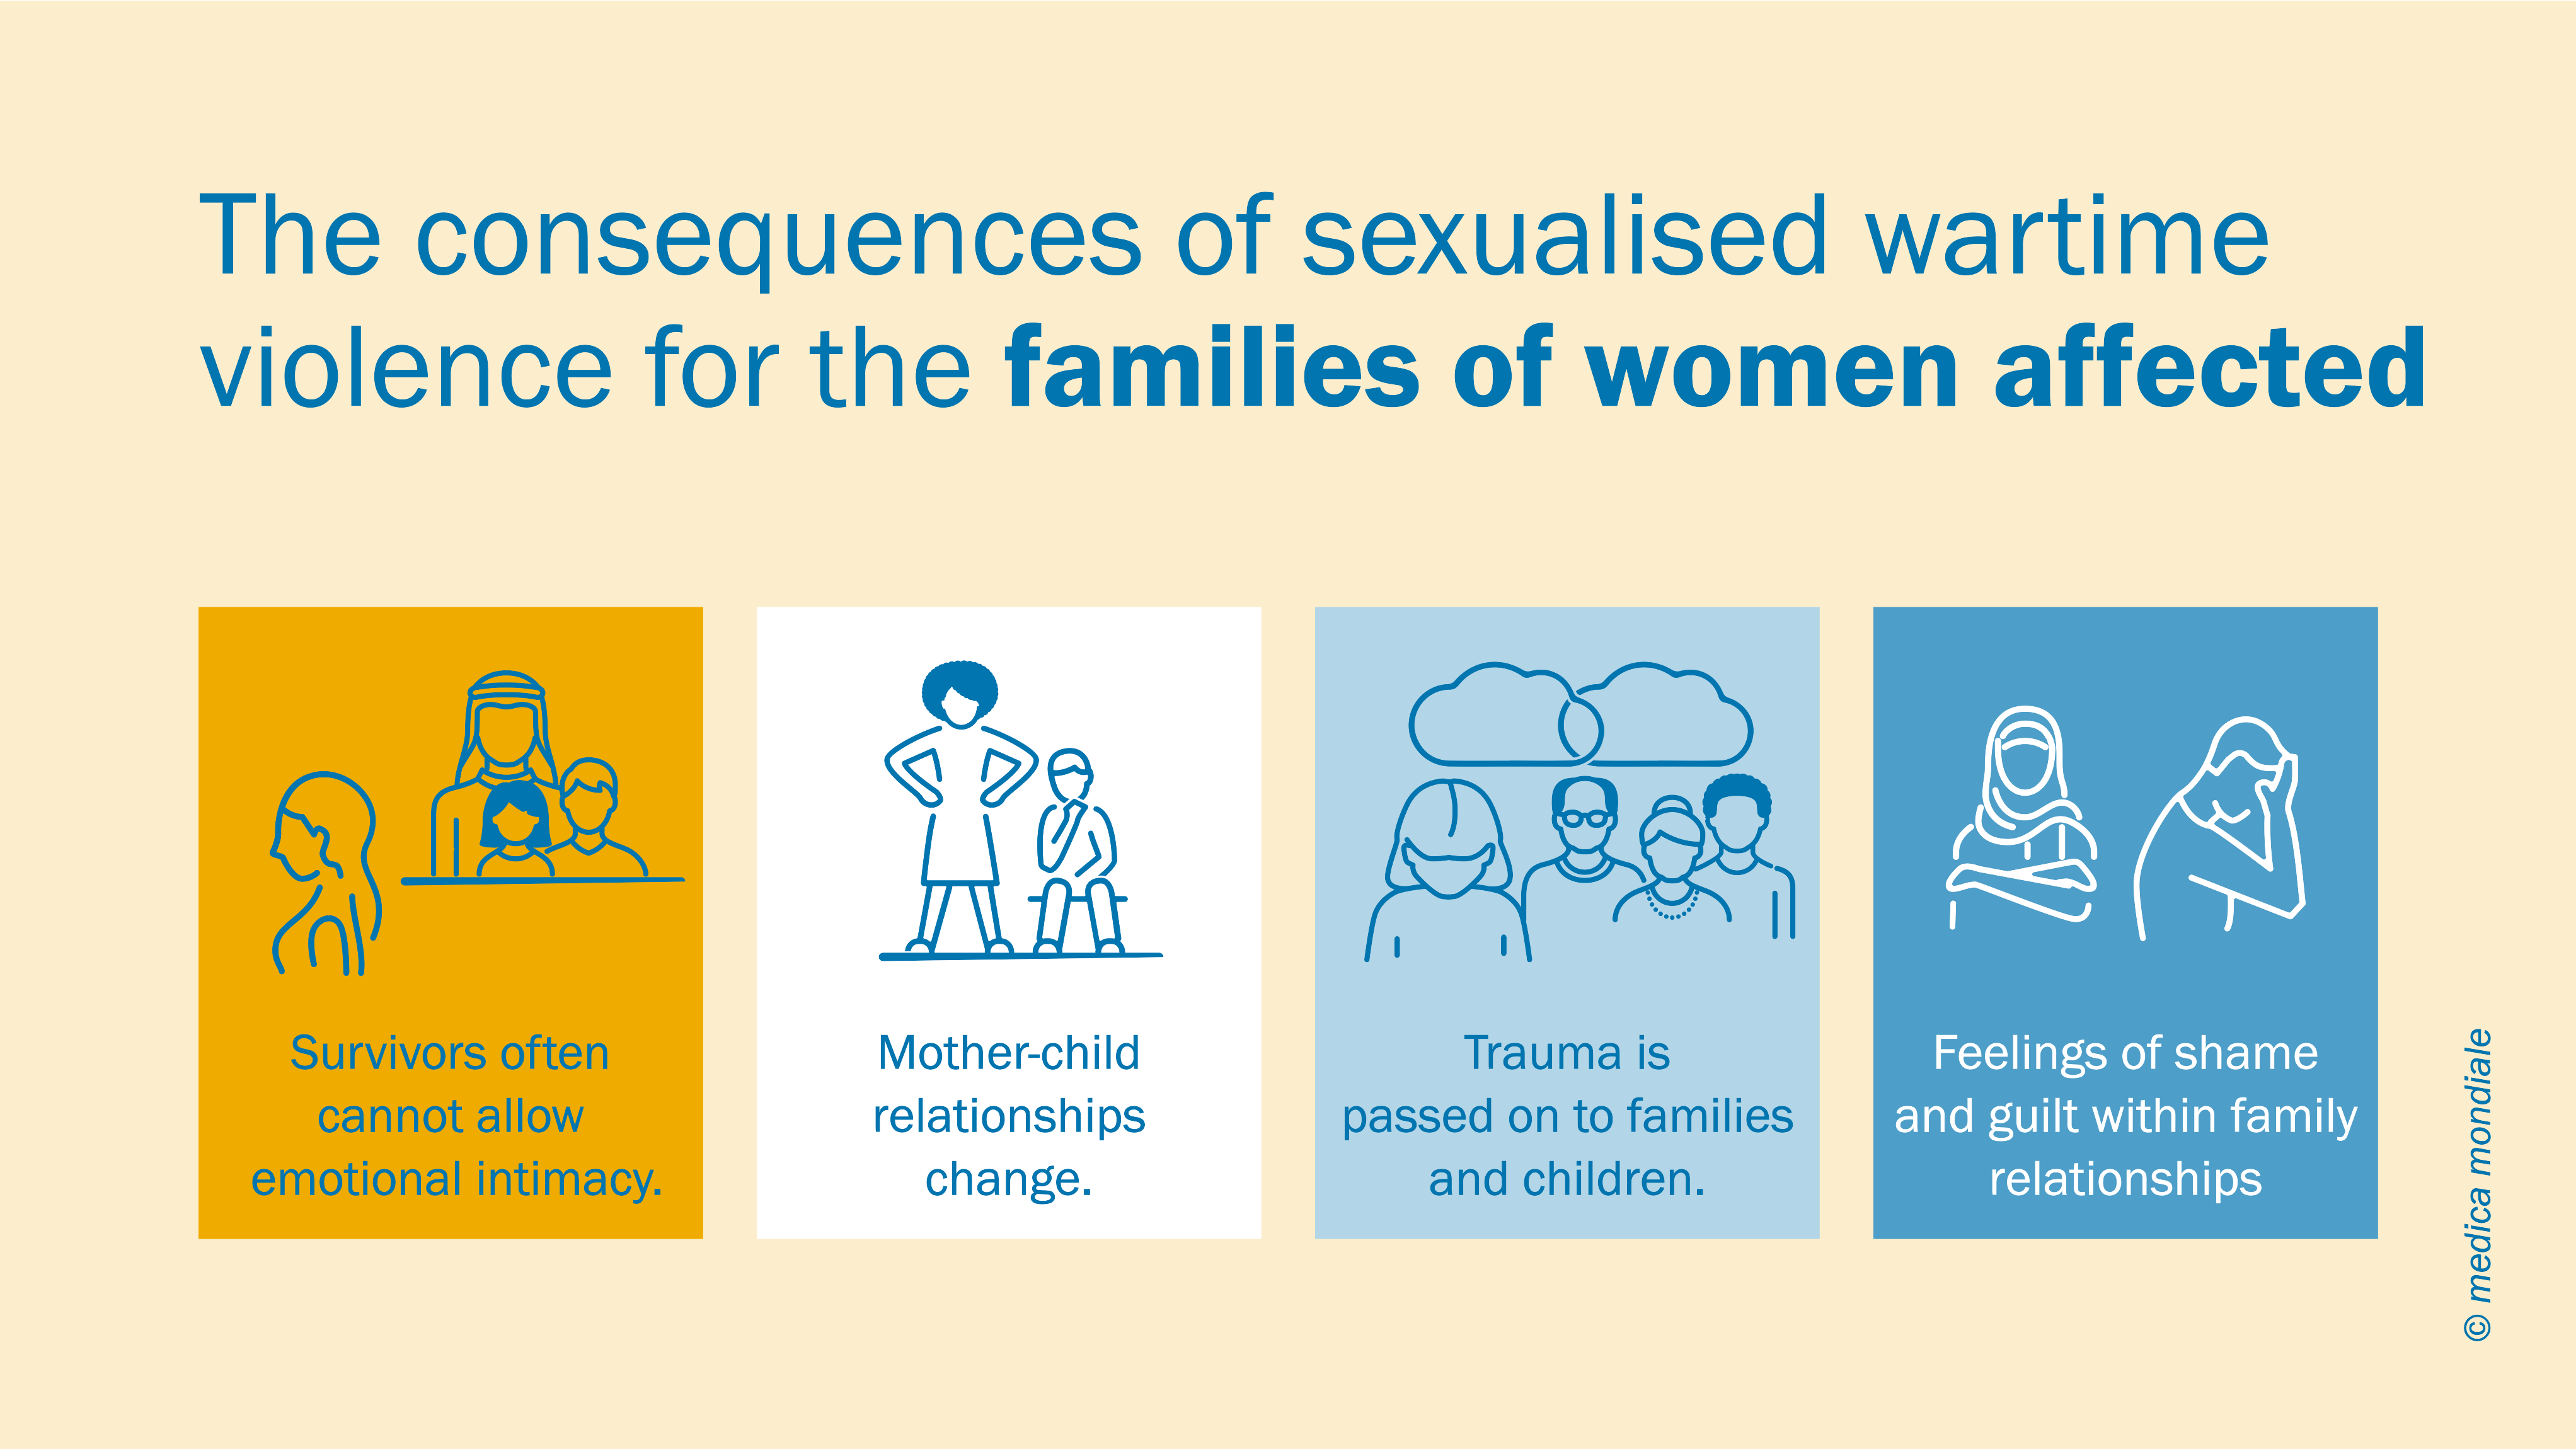 Infographic illustrating the consequences of sexualised war violence for families of affected women.